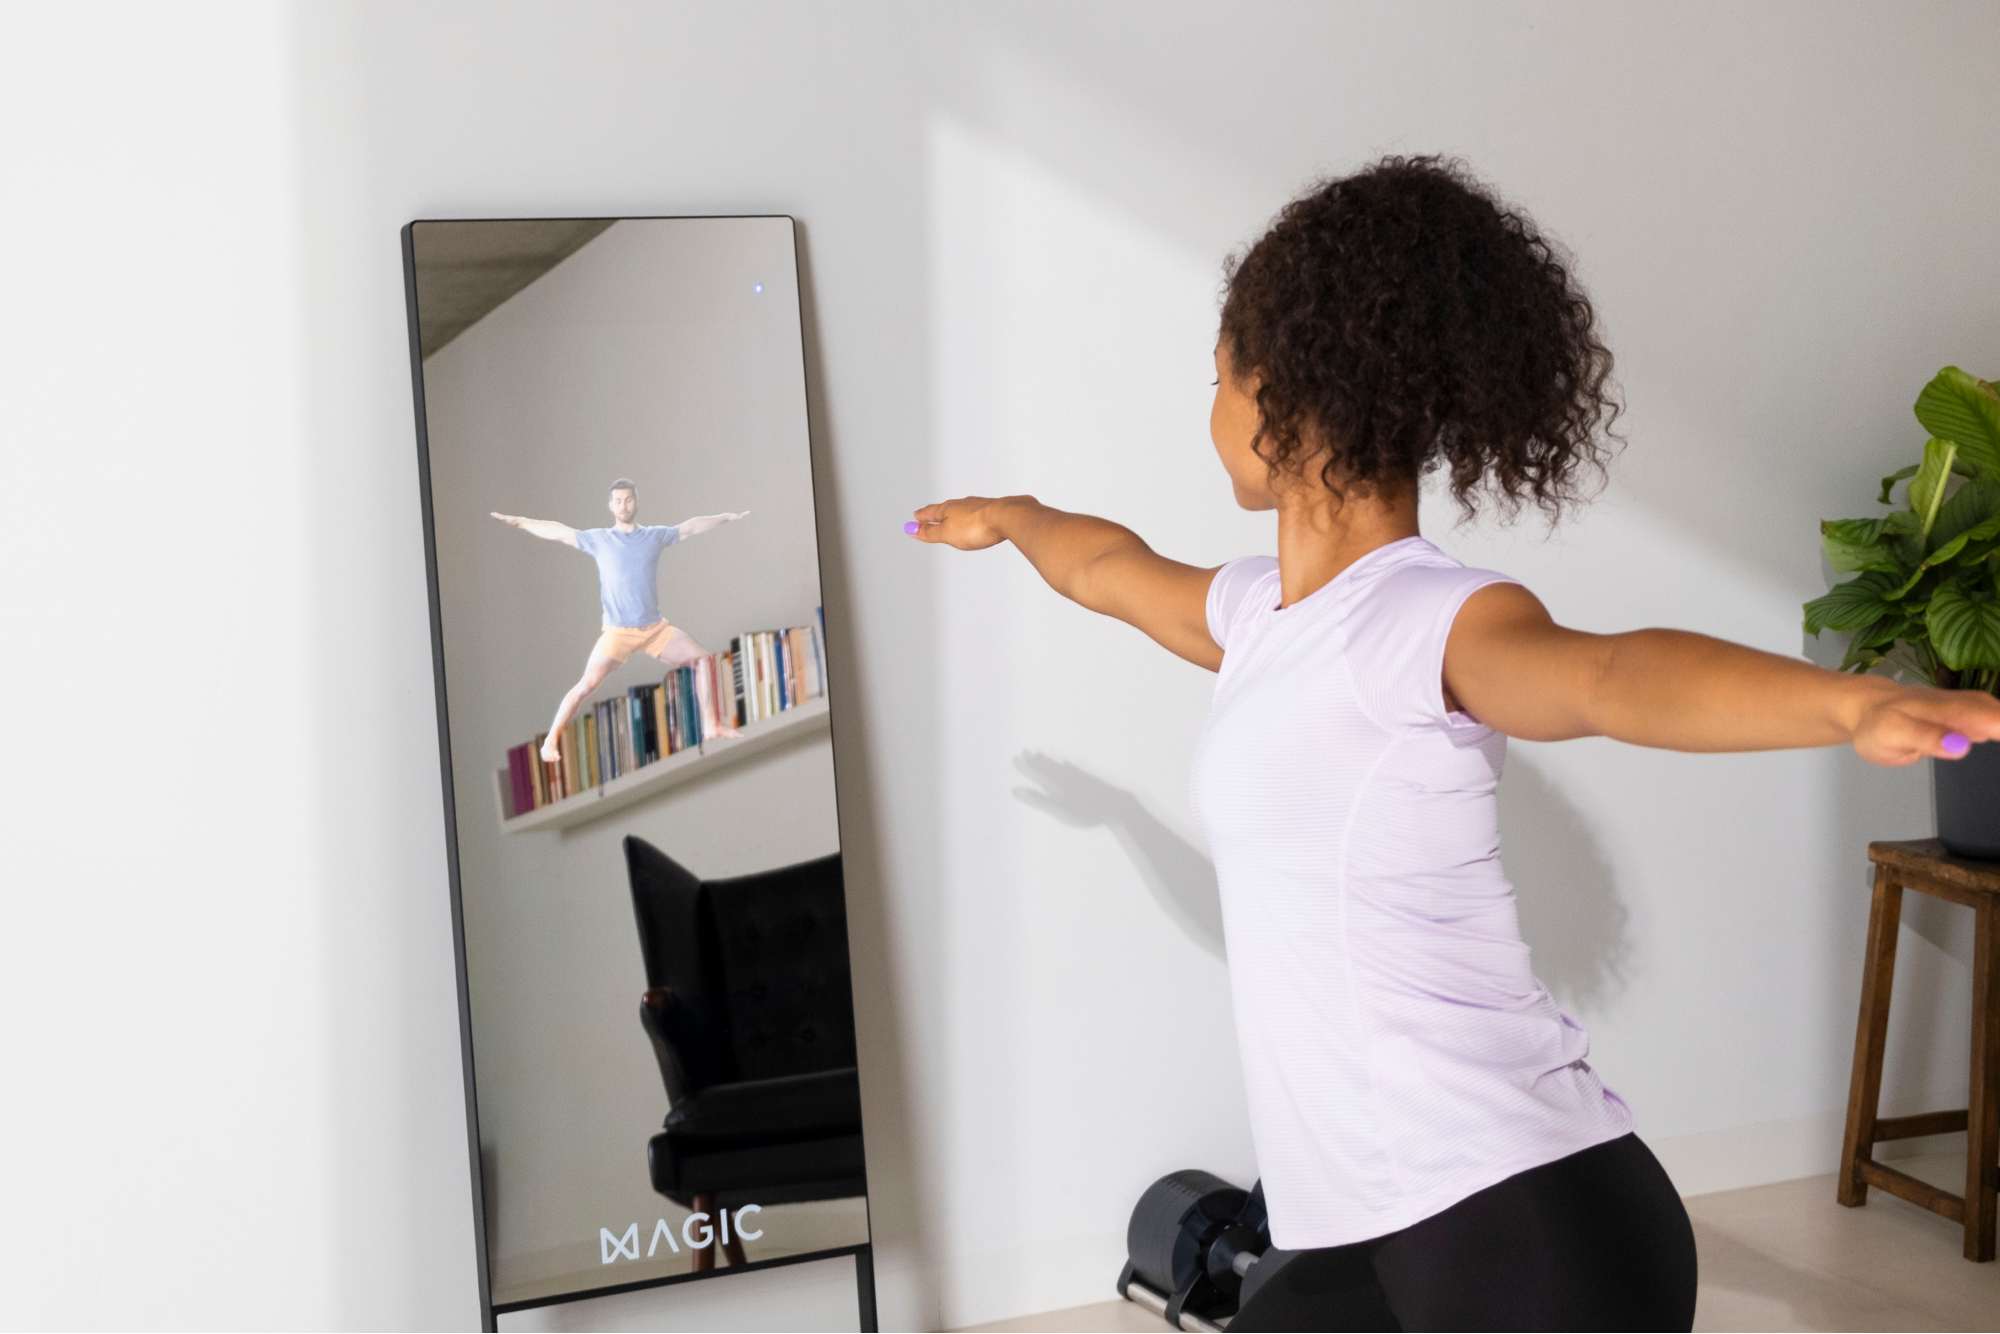 The high-tech fitness mirrors that aim to get you exercising more - BBC News